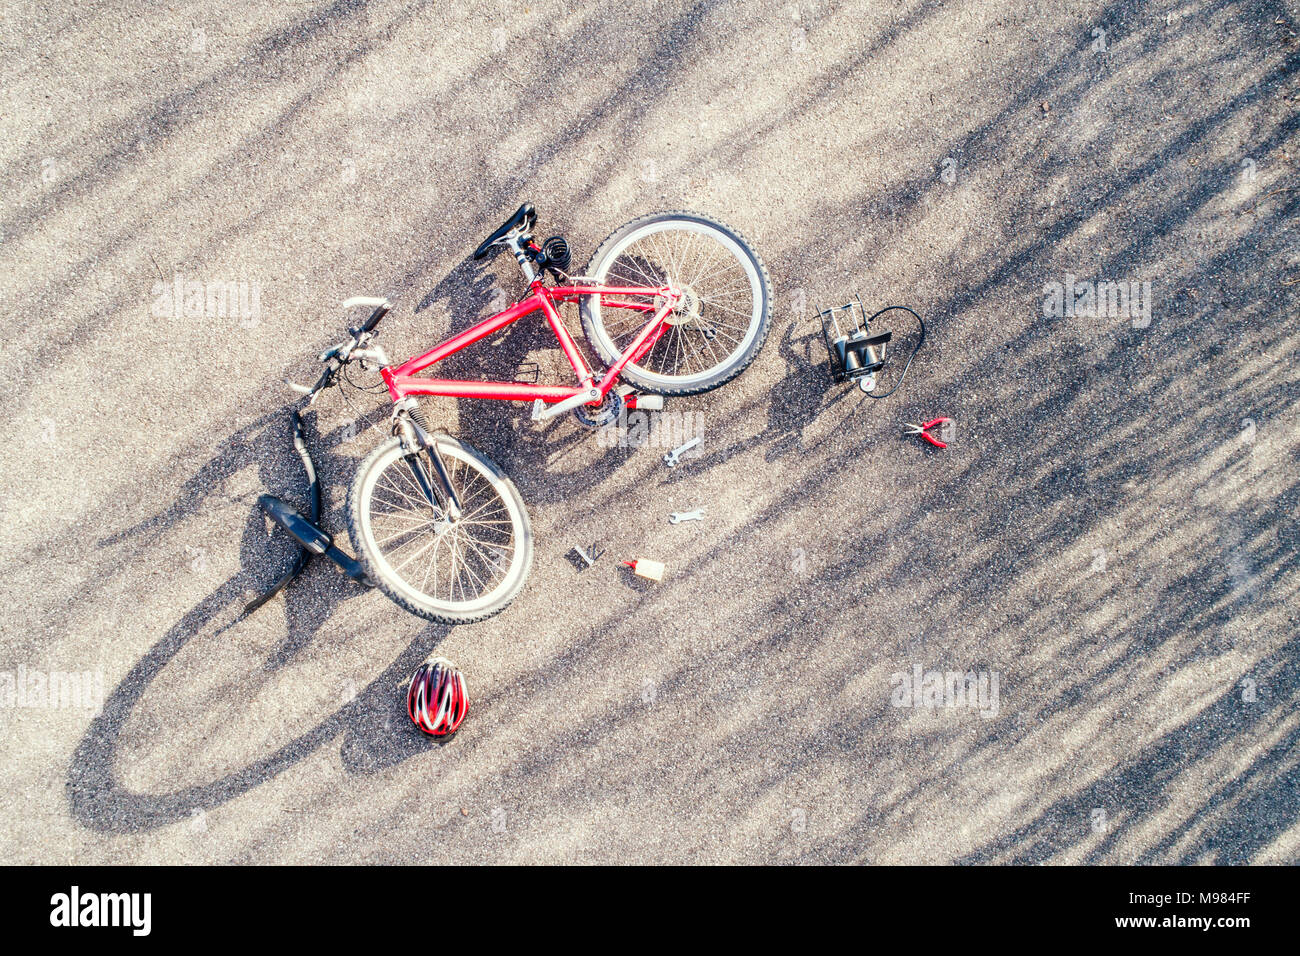 Bicycle, cycling helmet and repair tools on tarmac Stock Photo